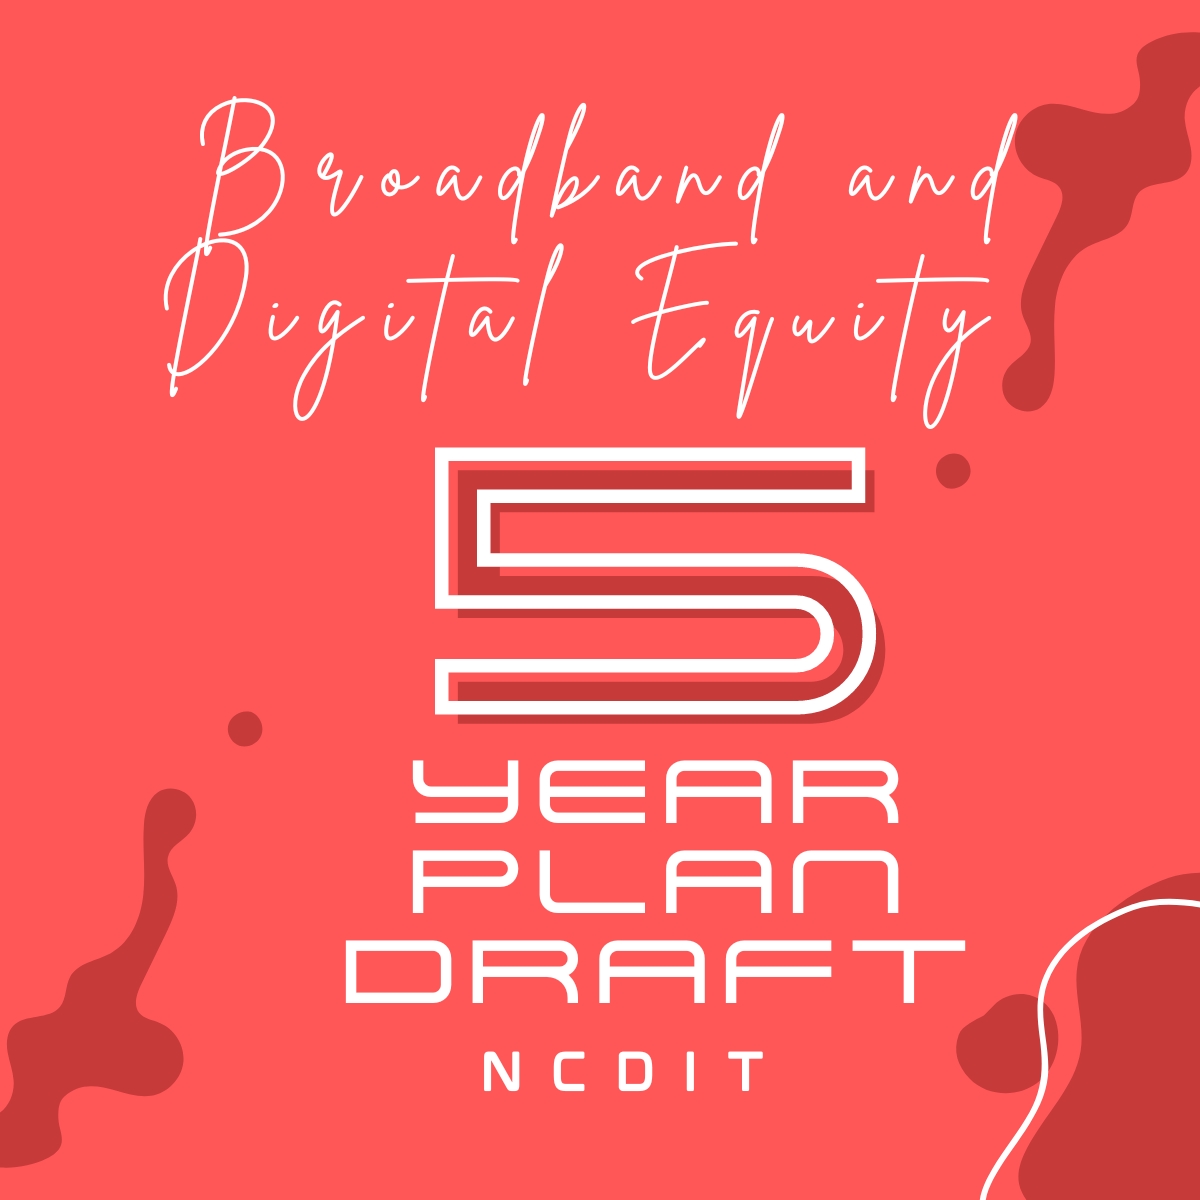 NCDIT 5 year draft plan for broadband equity